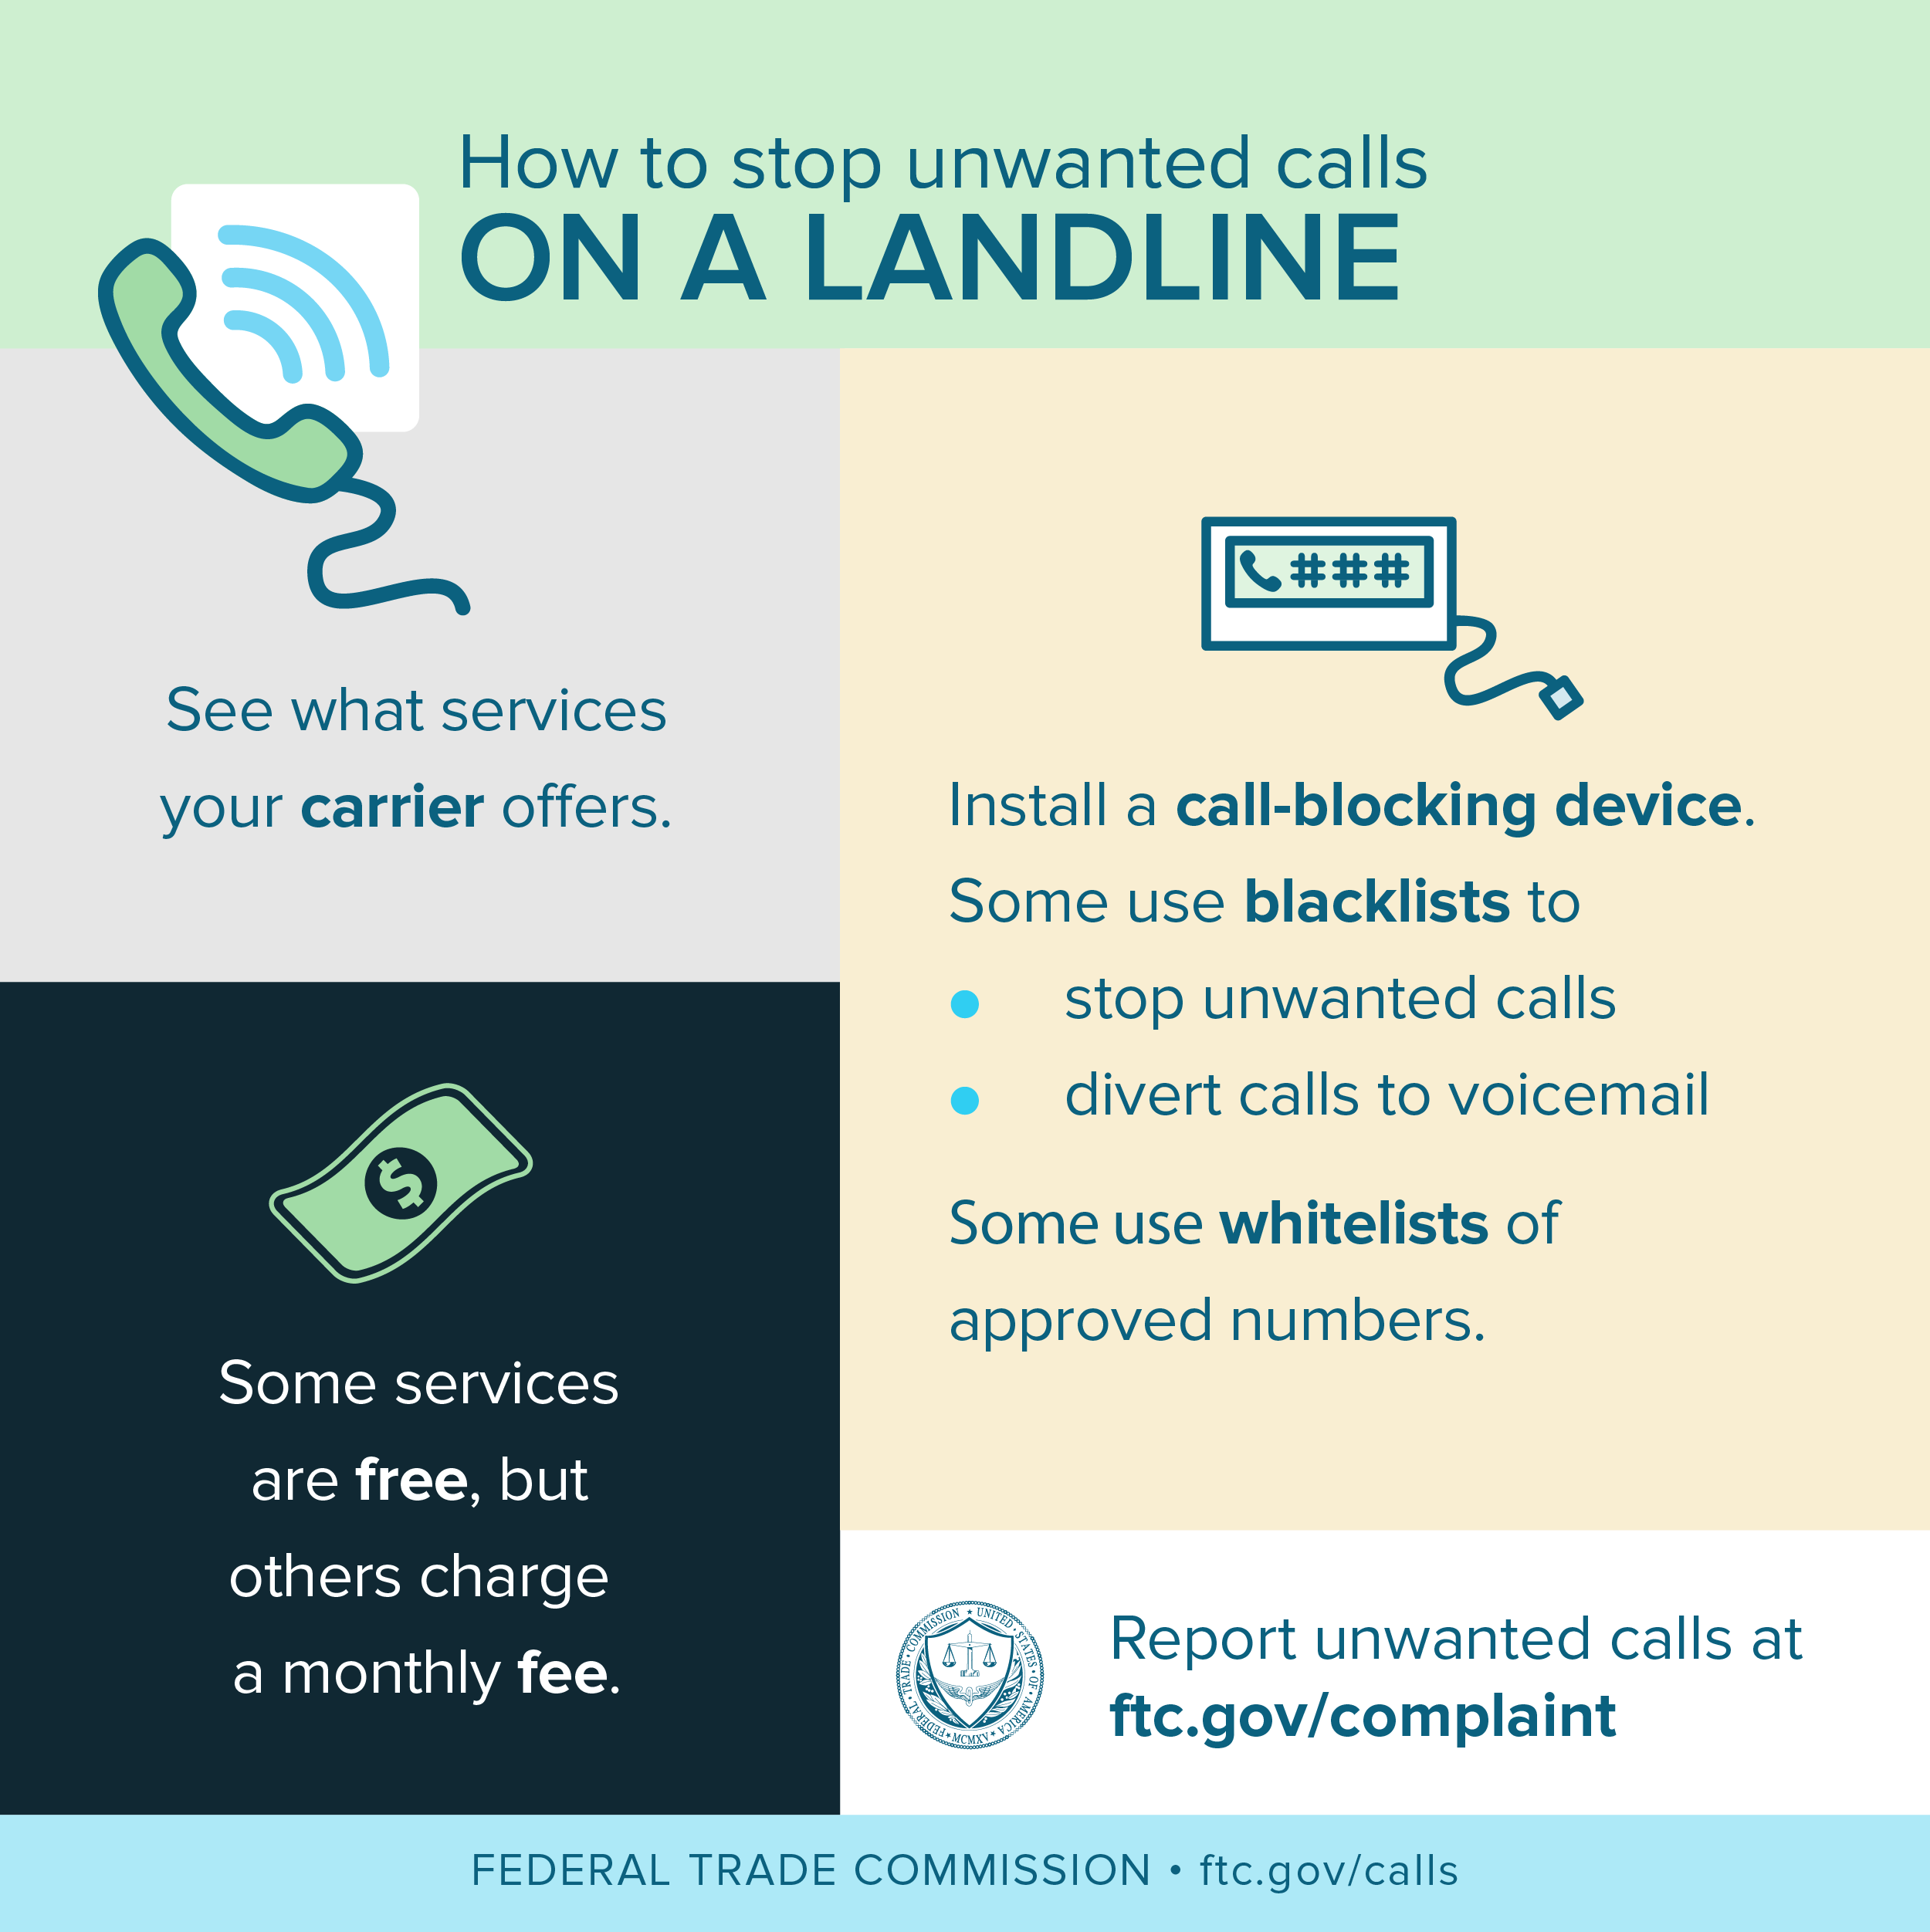 How to stop unwanted calls ON A LANDLINE Report unwanted calls at ftc.gov/complaint FEDERAL TRADE COMMISSION  ftc.gov/calls See what services your carrier oers. Some services are free, but others charge a monthly fee. DRAFT  3/19/18 Install a call-blocking device. Some use blacklists to • stop unwanted calls • divert calls to voicemail Some use whitelists of approved